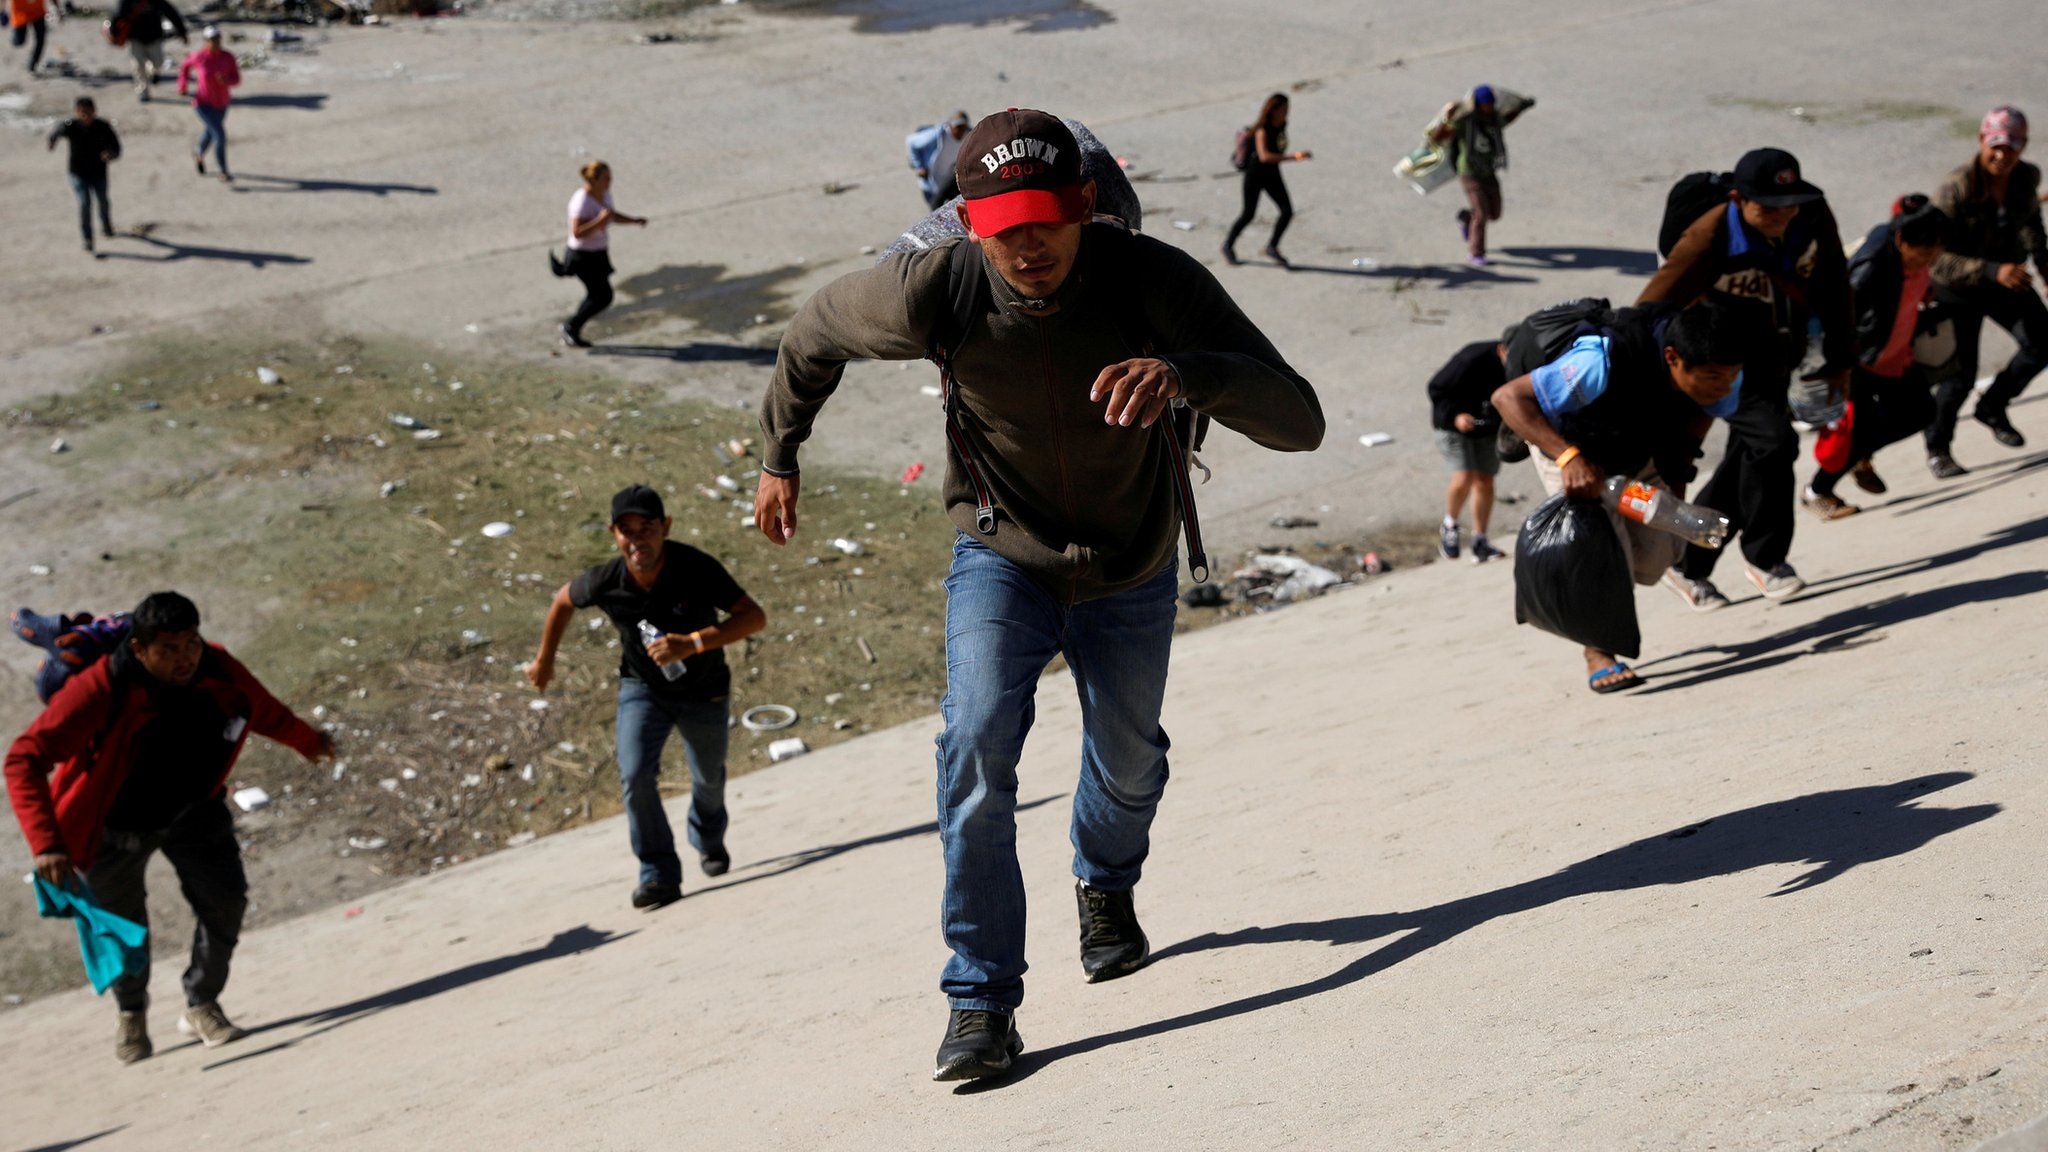 Migrants, part of a caravan of thousands traveling from Central America en route to the United States, run across the Tijuana river